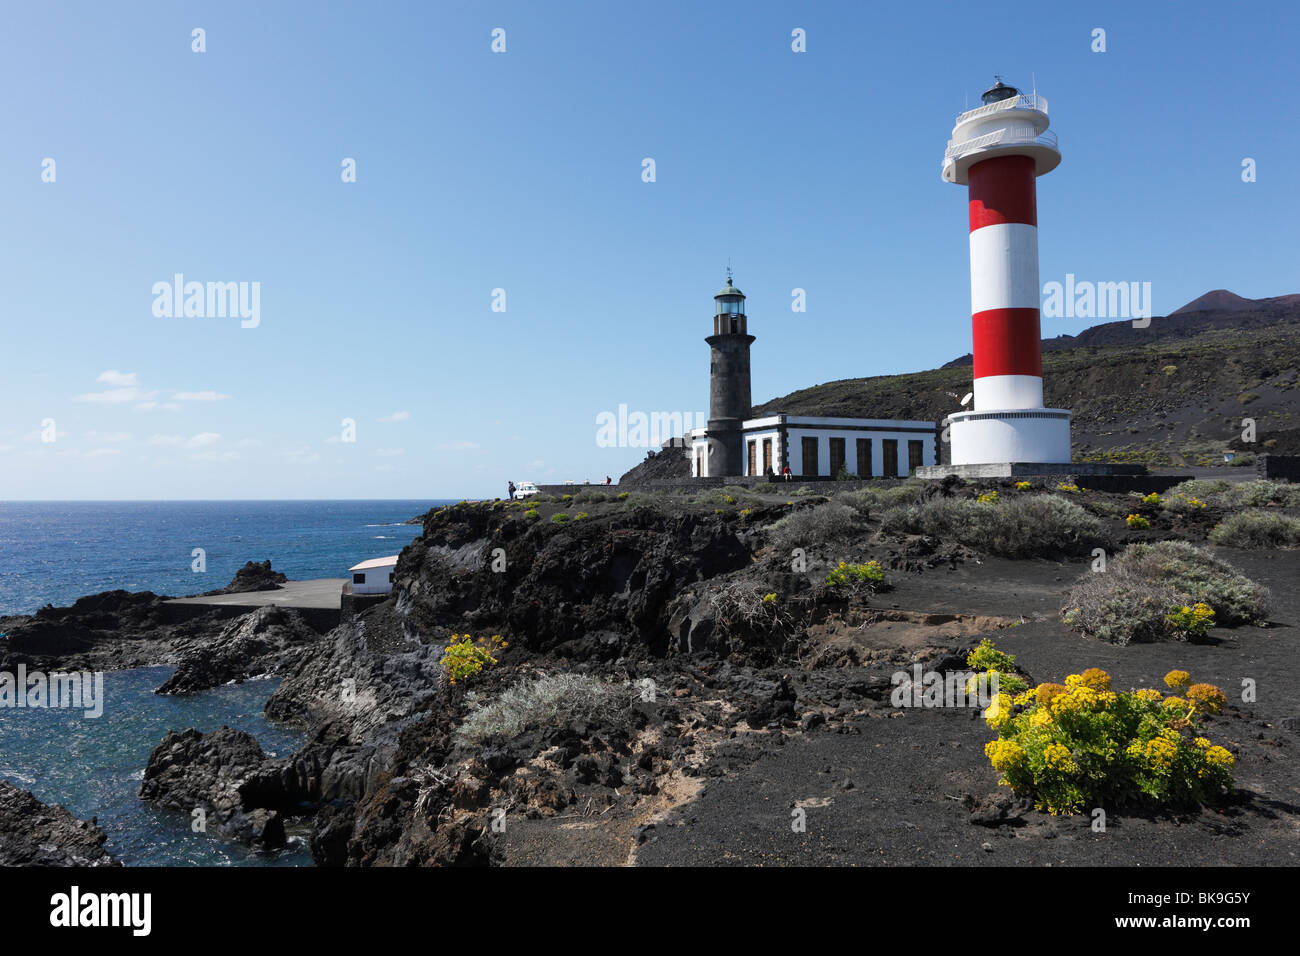 Lighthouses, old and new, Fuencaliente de Faro, La Palma, Canary Islands, Spain, Europe Stock Photo